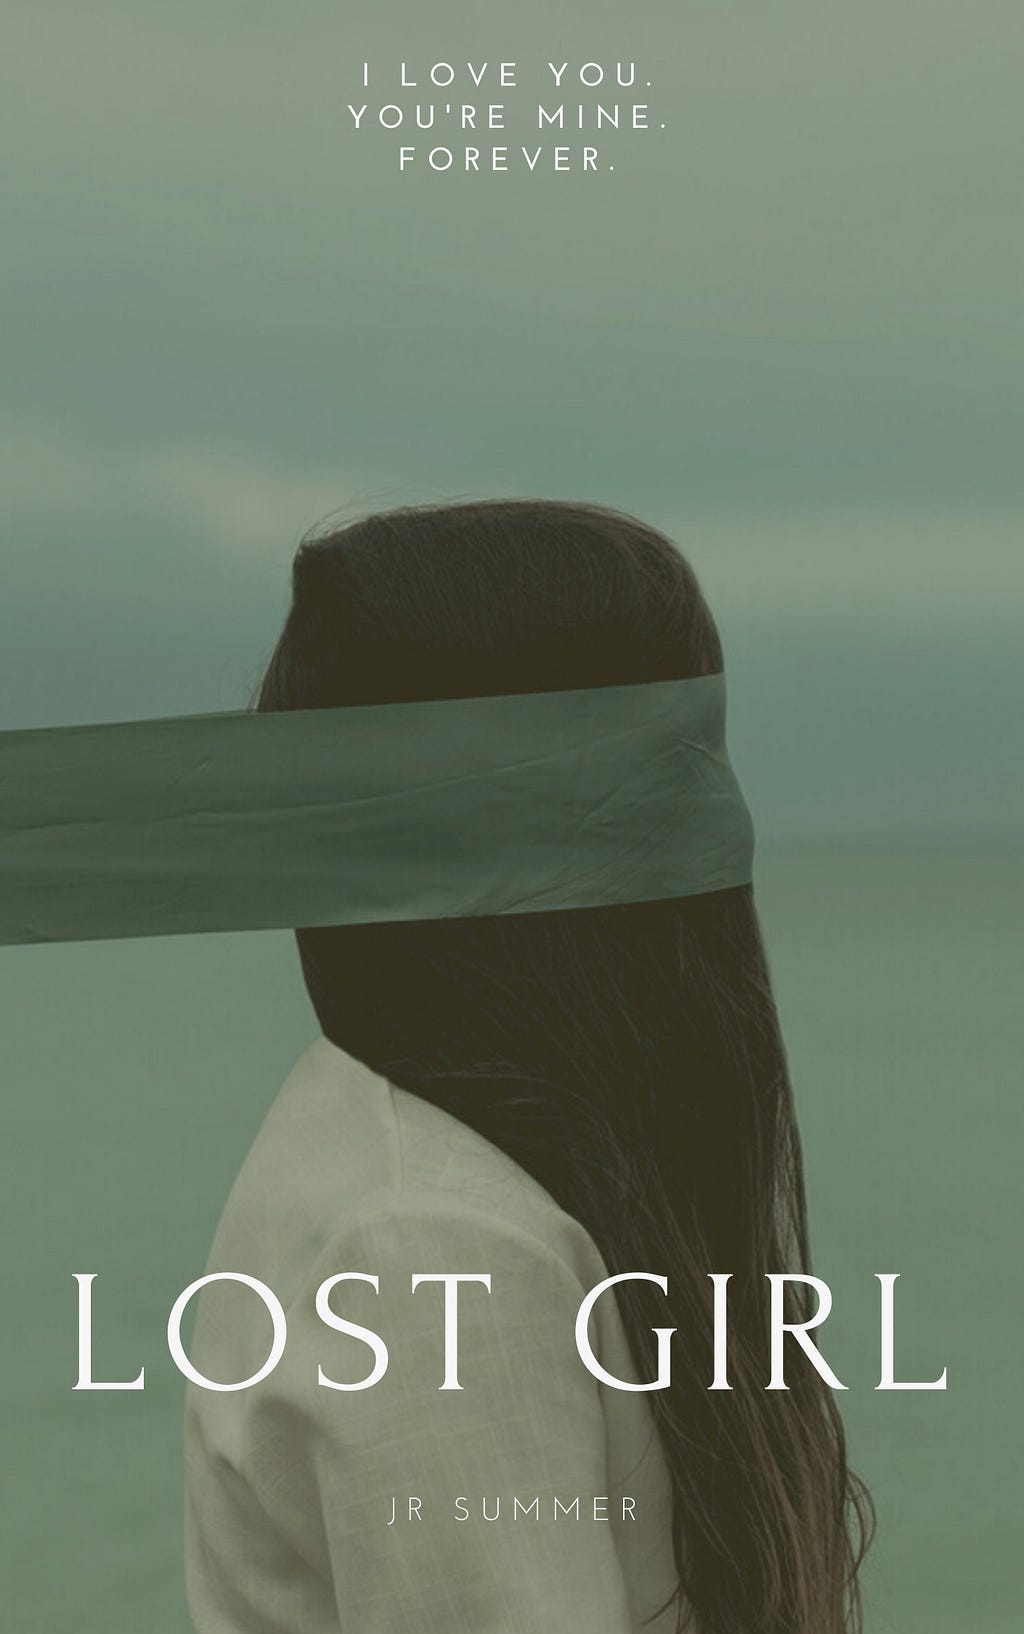 A blindfolded woman waits above text reading Lost Girls, by JR Summer.